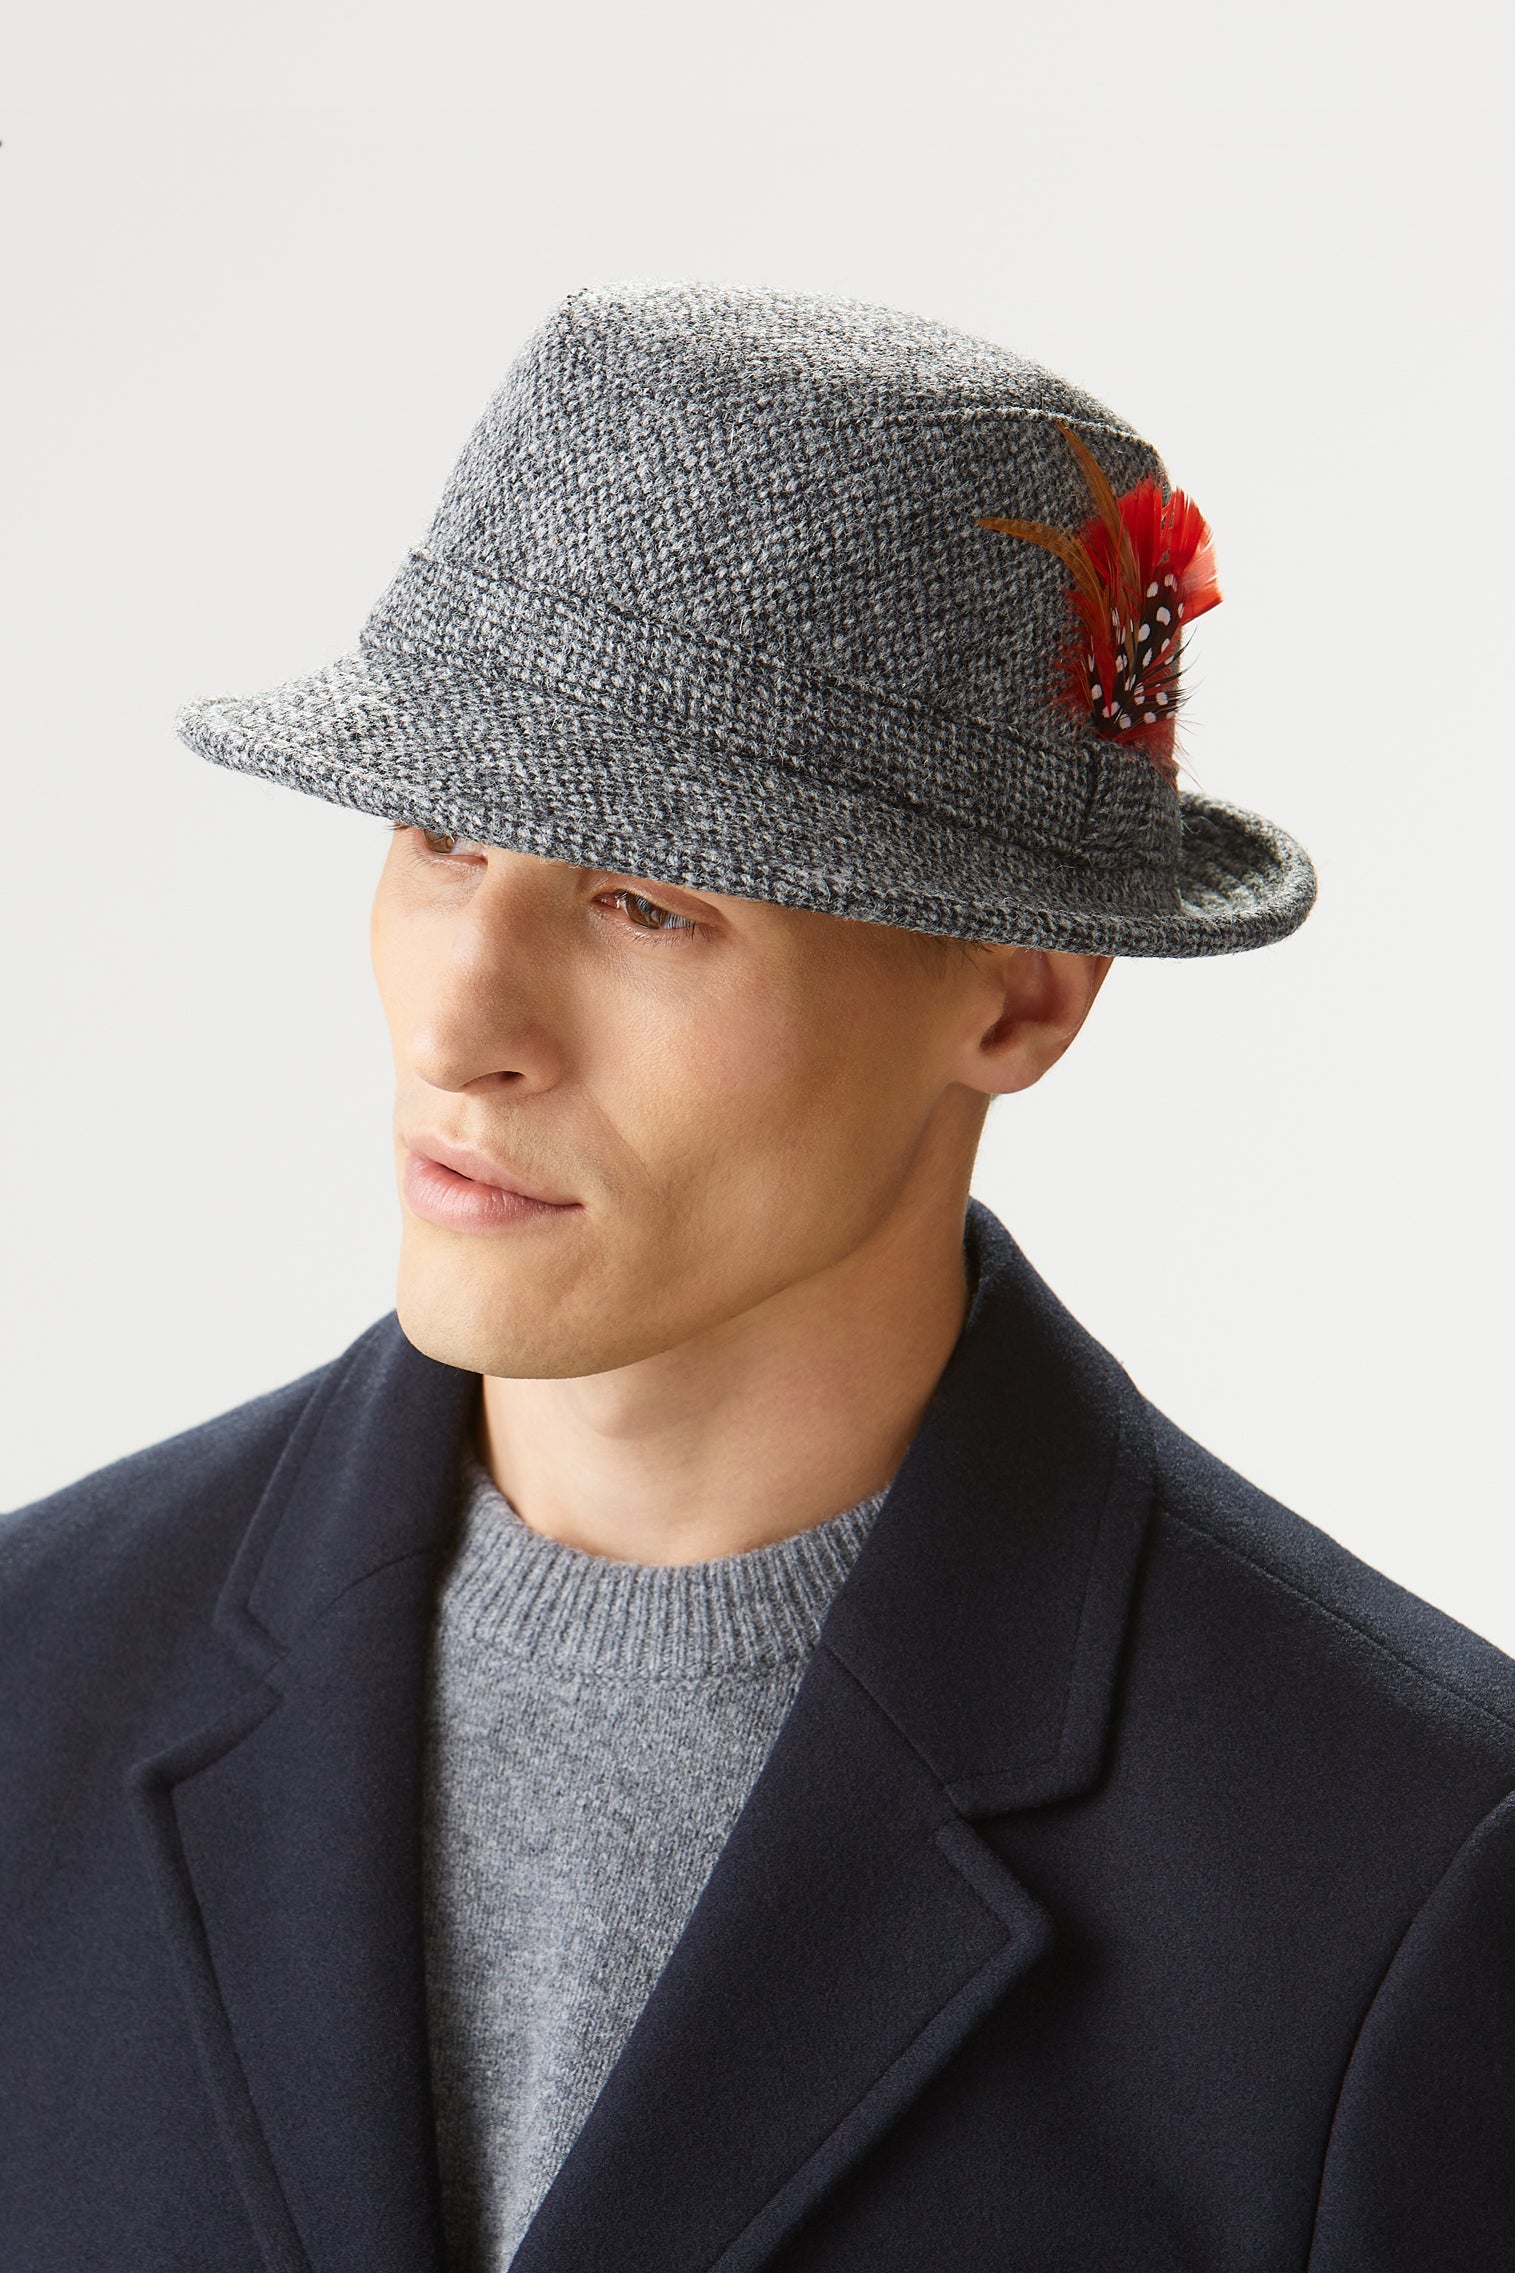 Grouse Tweed Rollable Hat - All Ready to Wear - Lock & Co. Hatters London UK